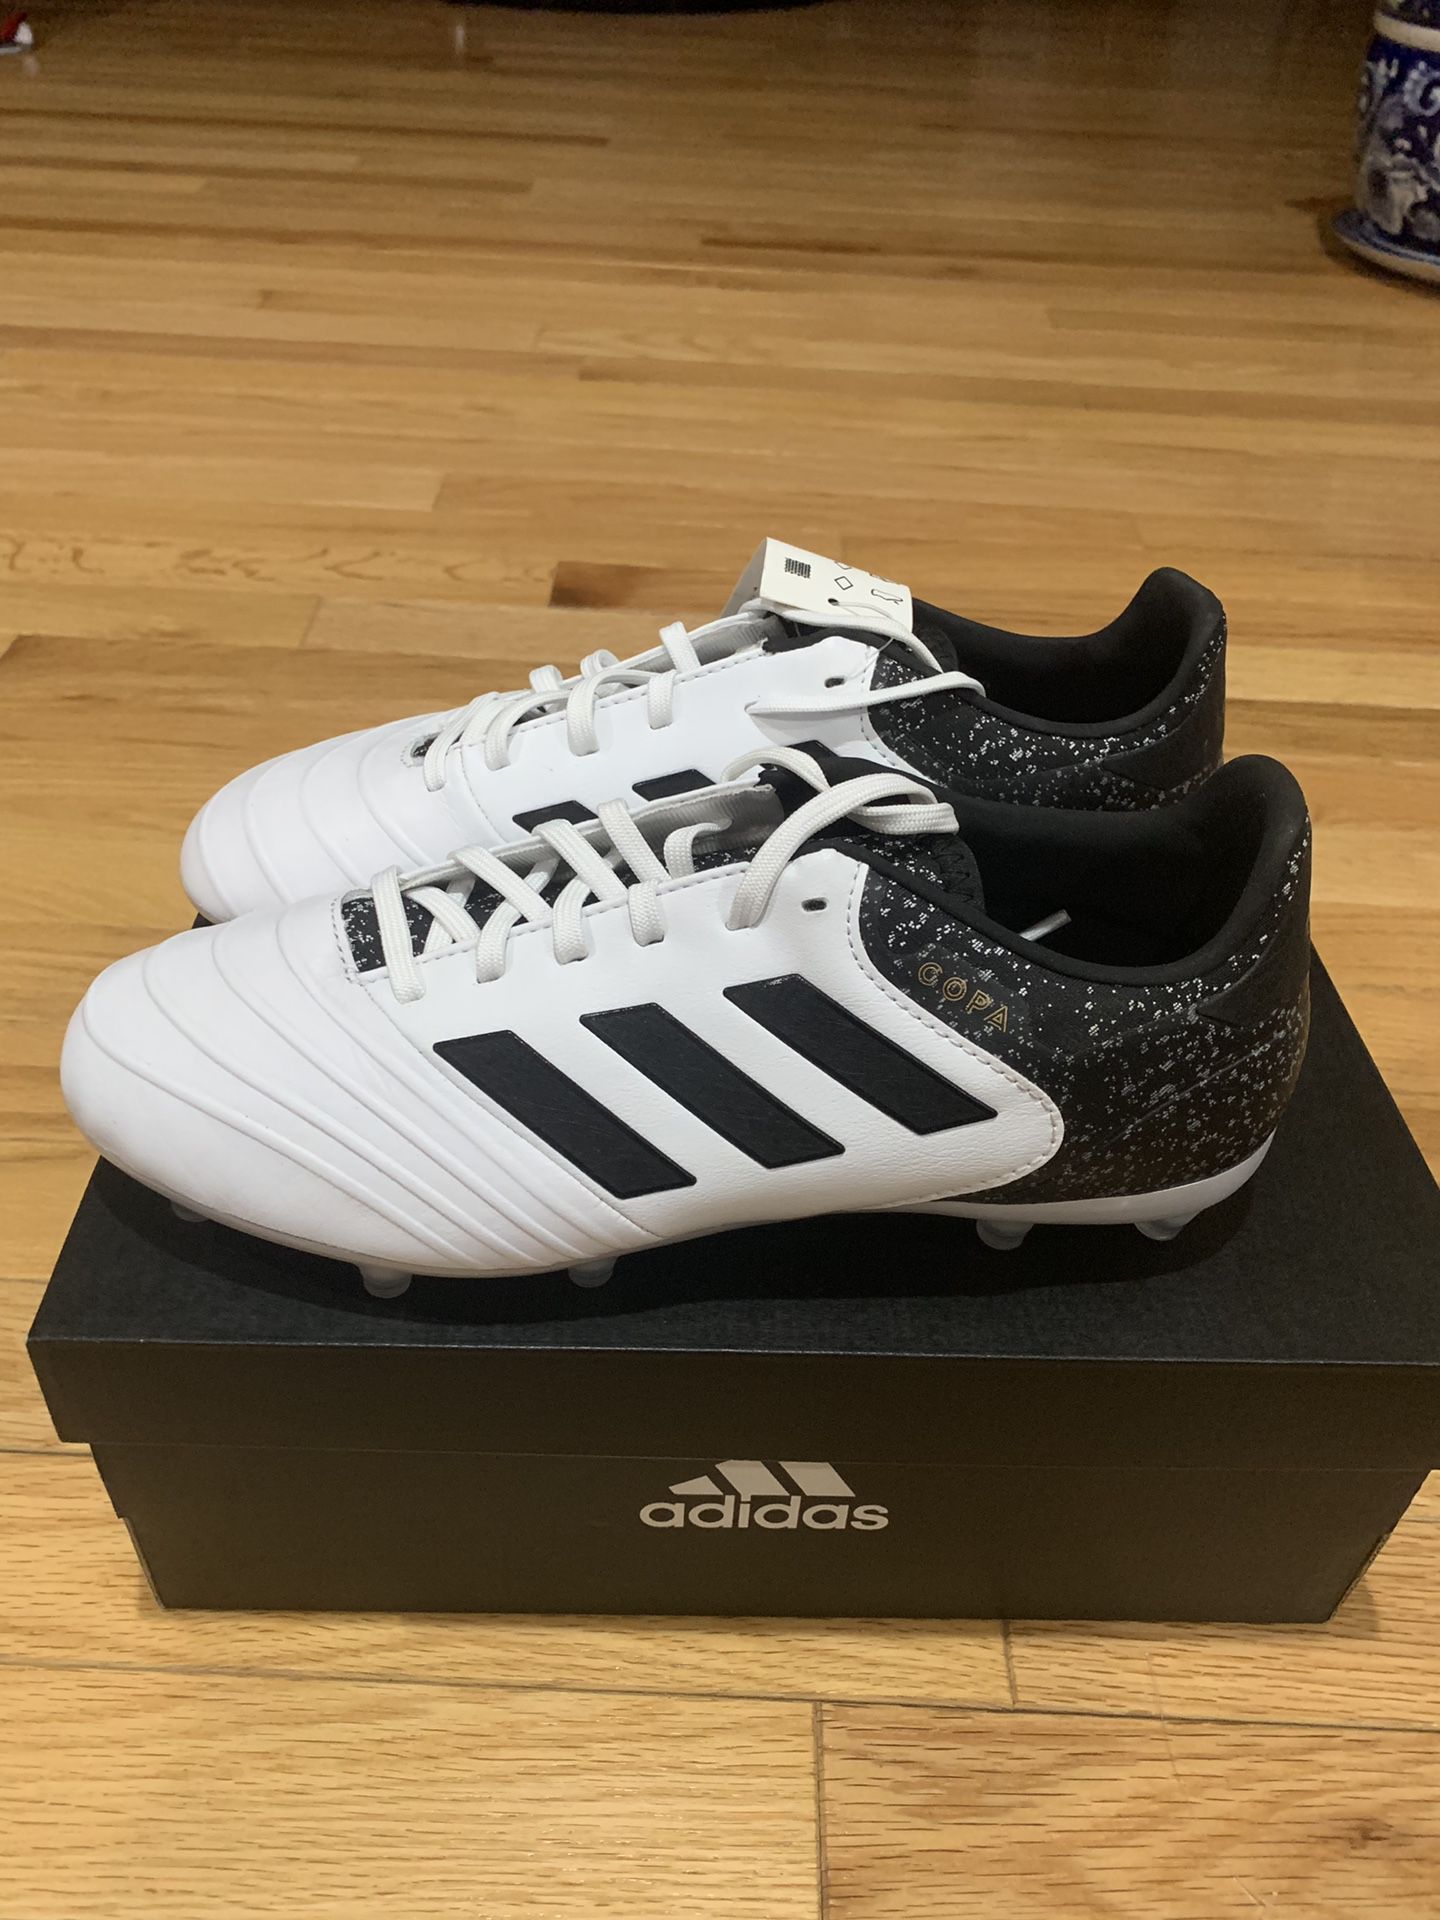 ADIDAS COPA 18.2 SSIZE 7.5 for Sale in MA - OfferUp